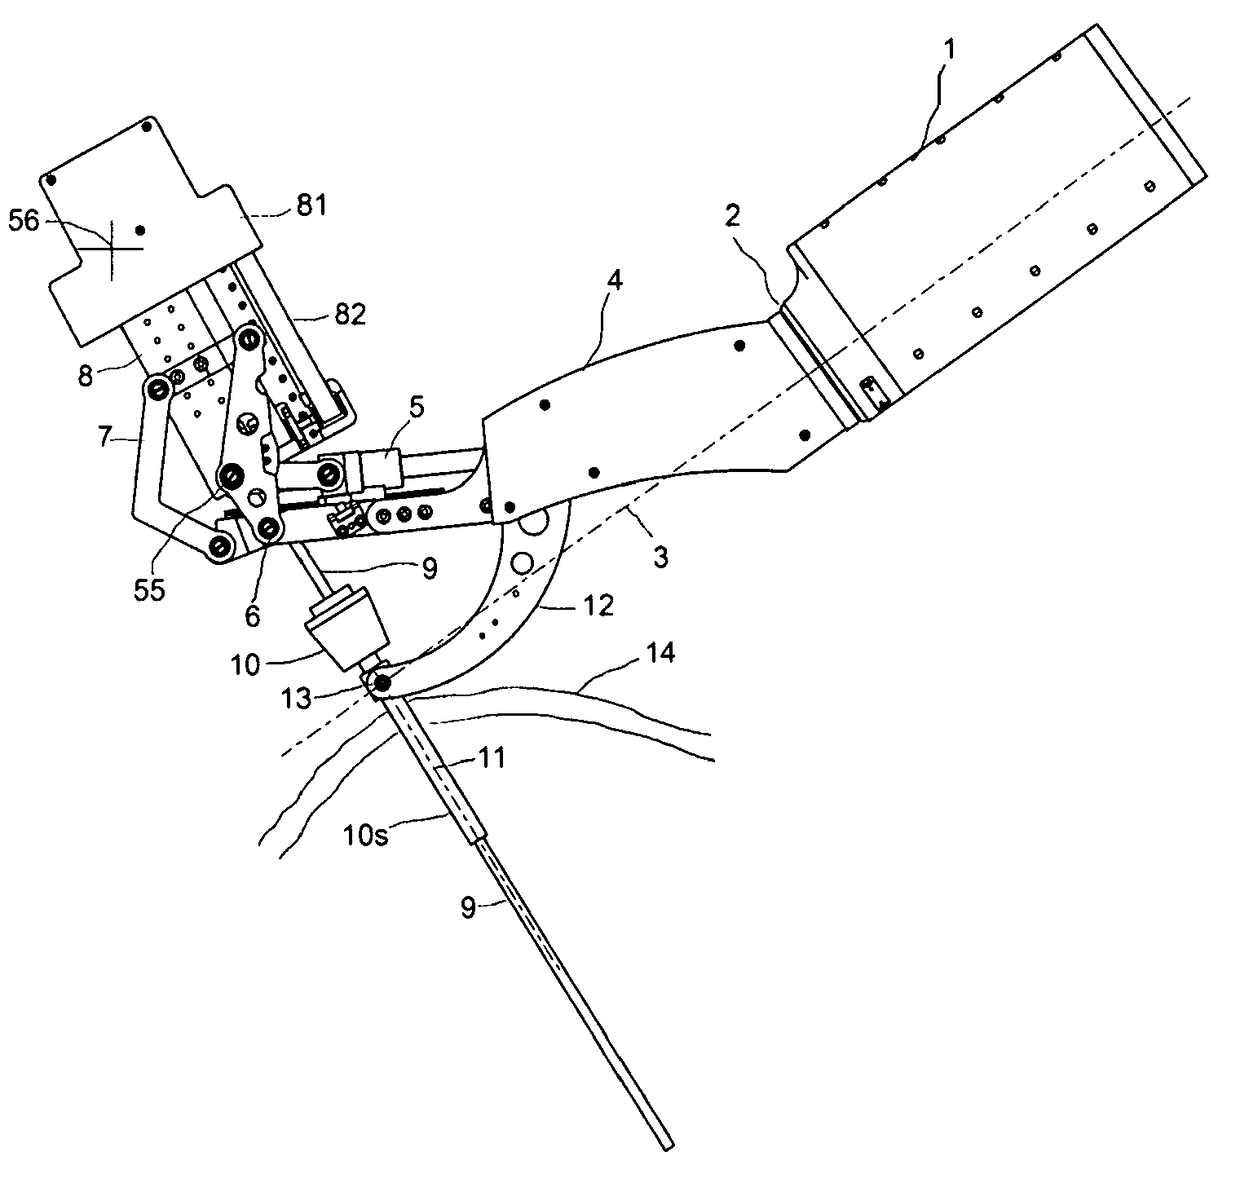 Holding and positioning apparatus of a surgical instrument and/or an endoscope for minimally invasive surgery and a robotic surgical system